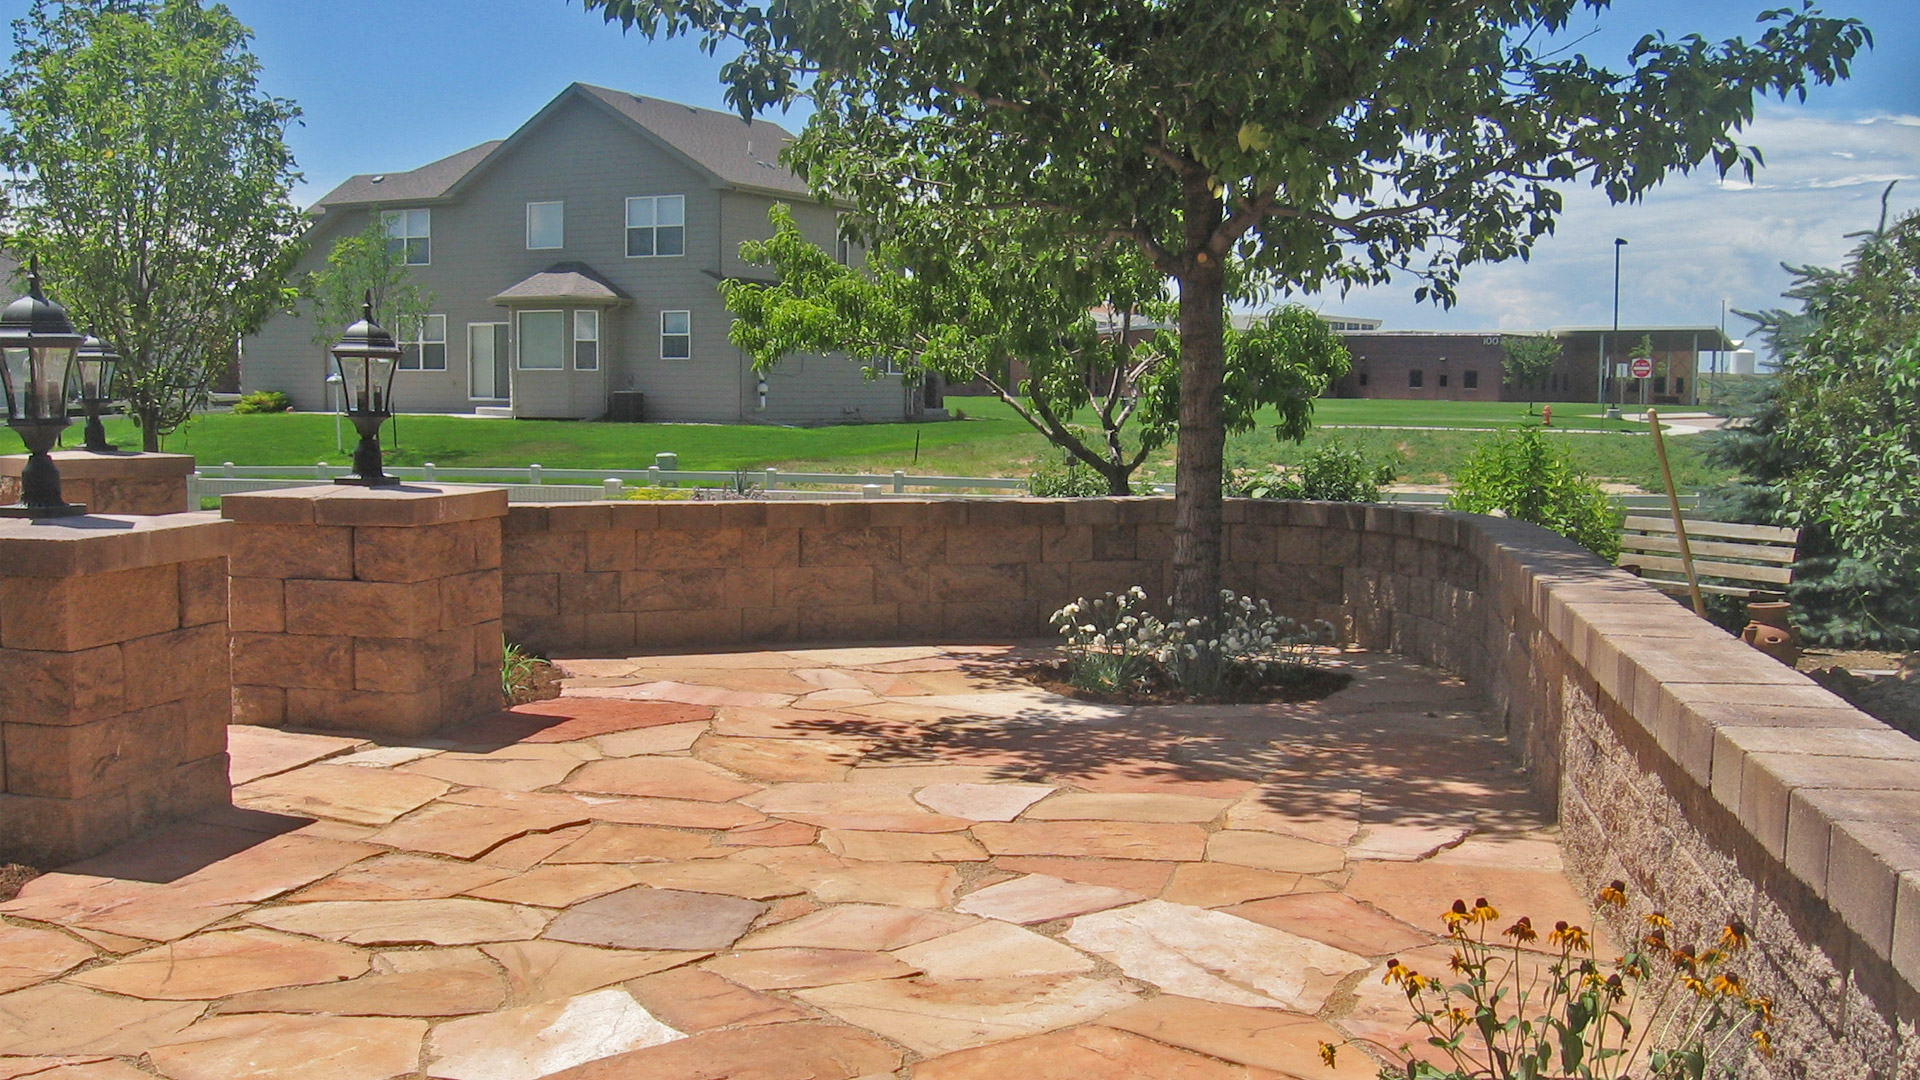 A new seating wall built around the clients recently installed patio in the backyard of a home in Loveland, CO.